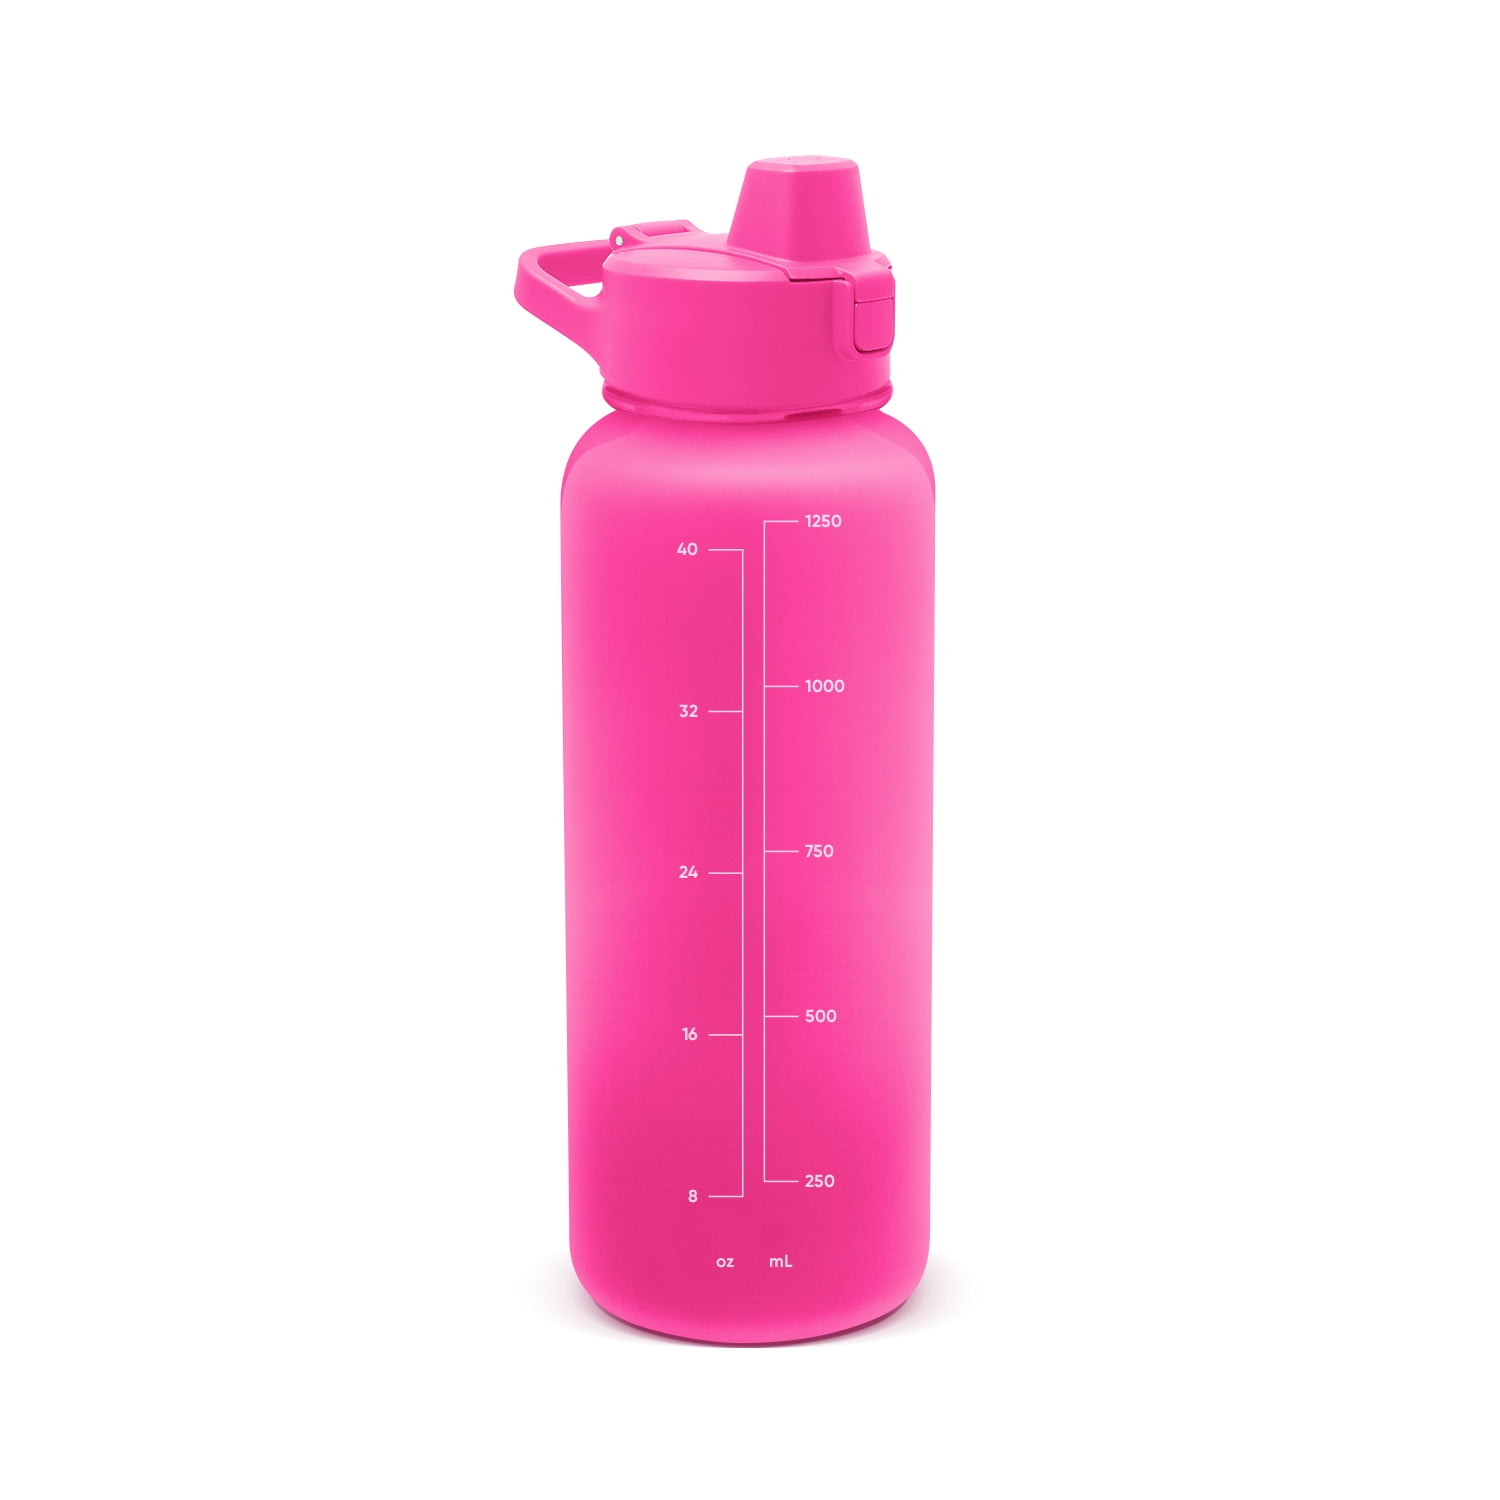 Glass Water Bottle with Straw - PROMOrx